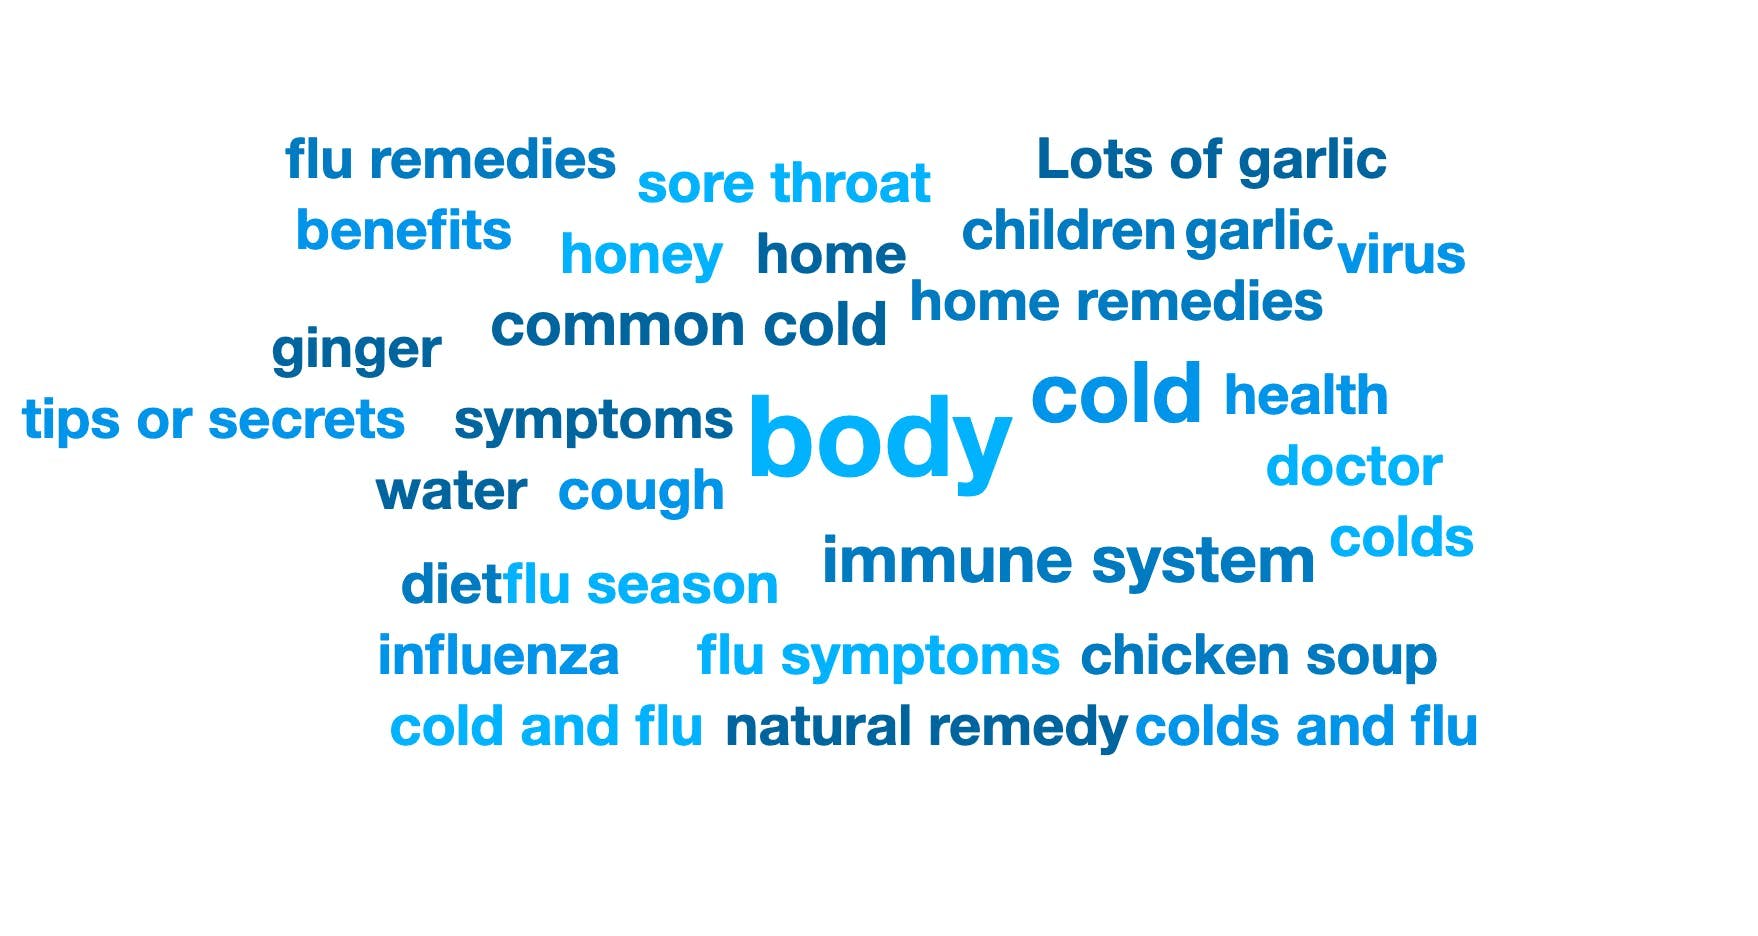 A keyword cloud showing top keywords and phrases in the cold/flu remedy conversation with the largest word being "body".